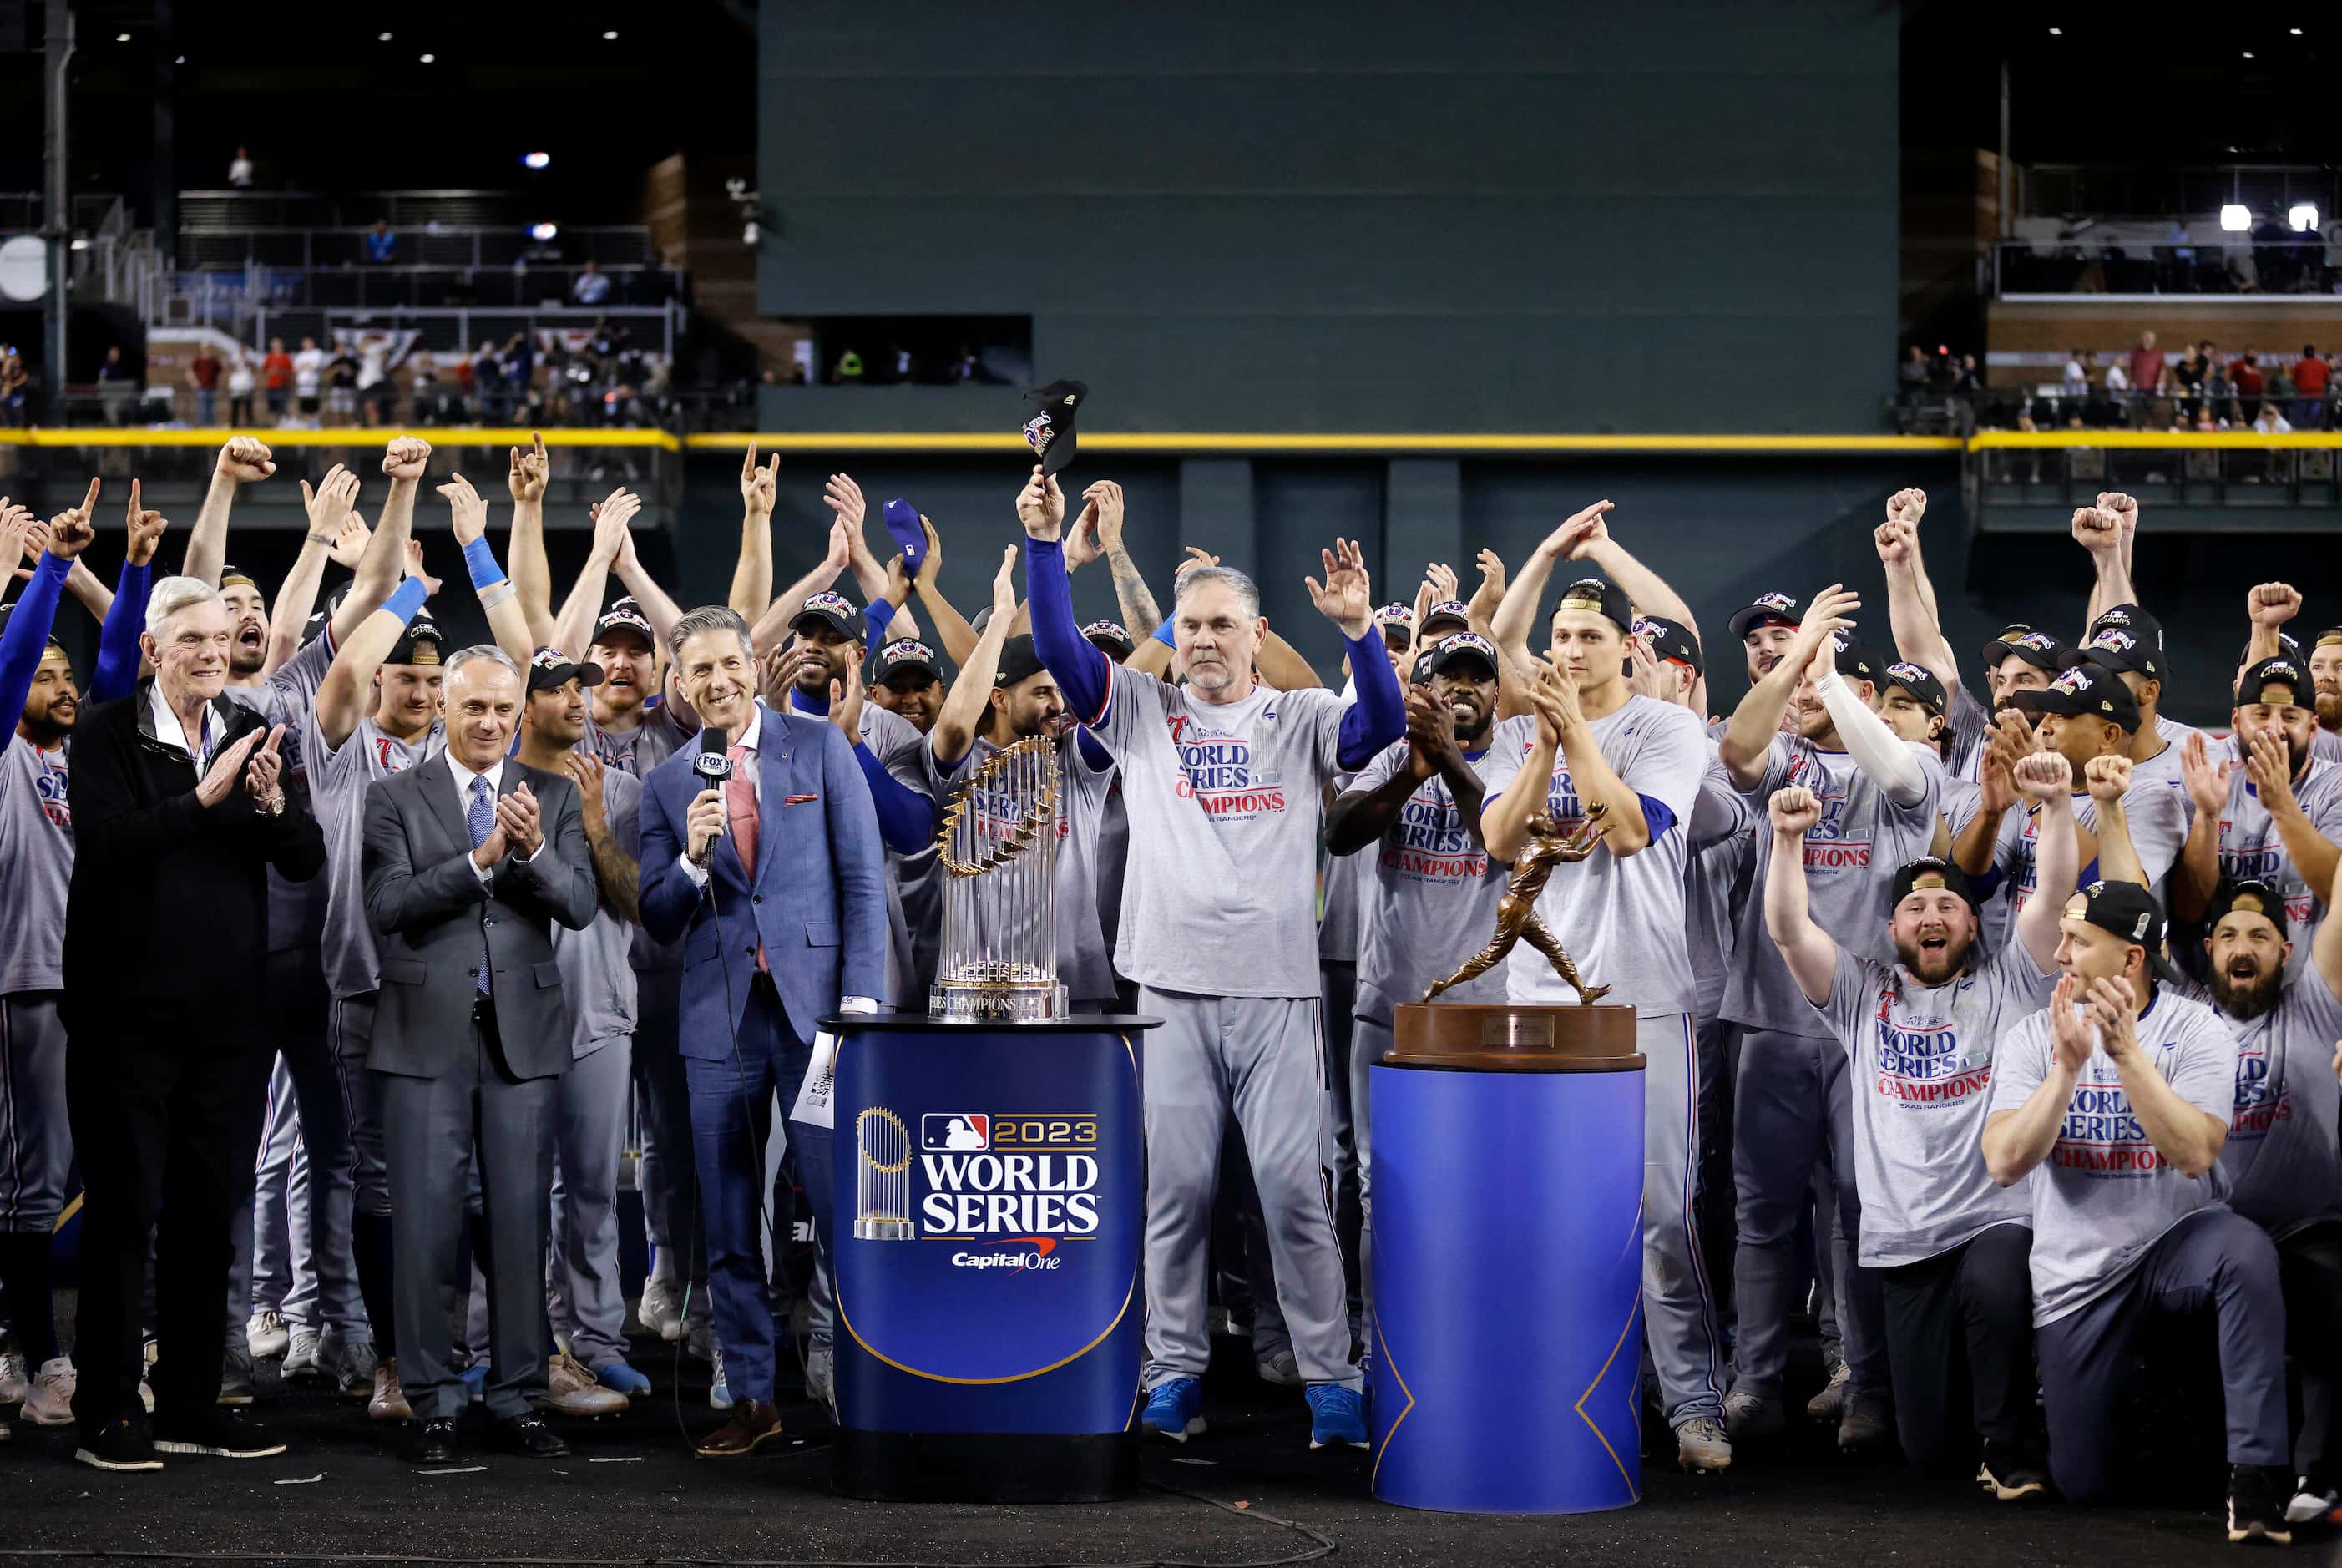 The Texas Rangers baseball team is introduced as World Series Champions during a postgame...